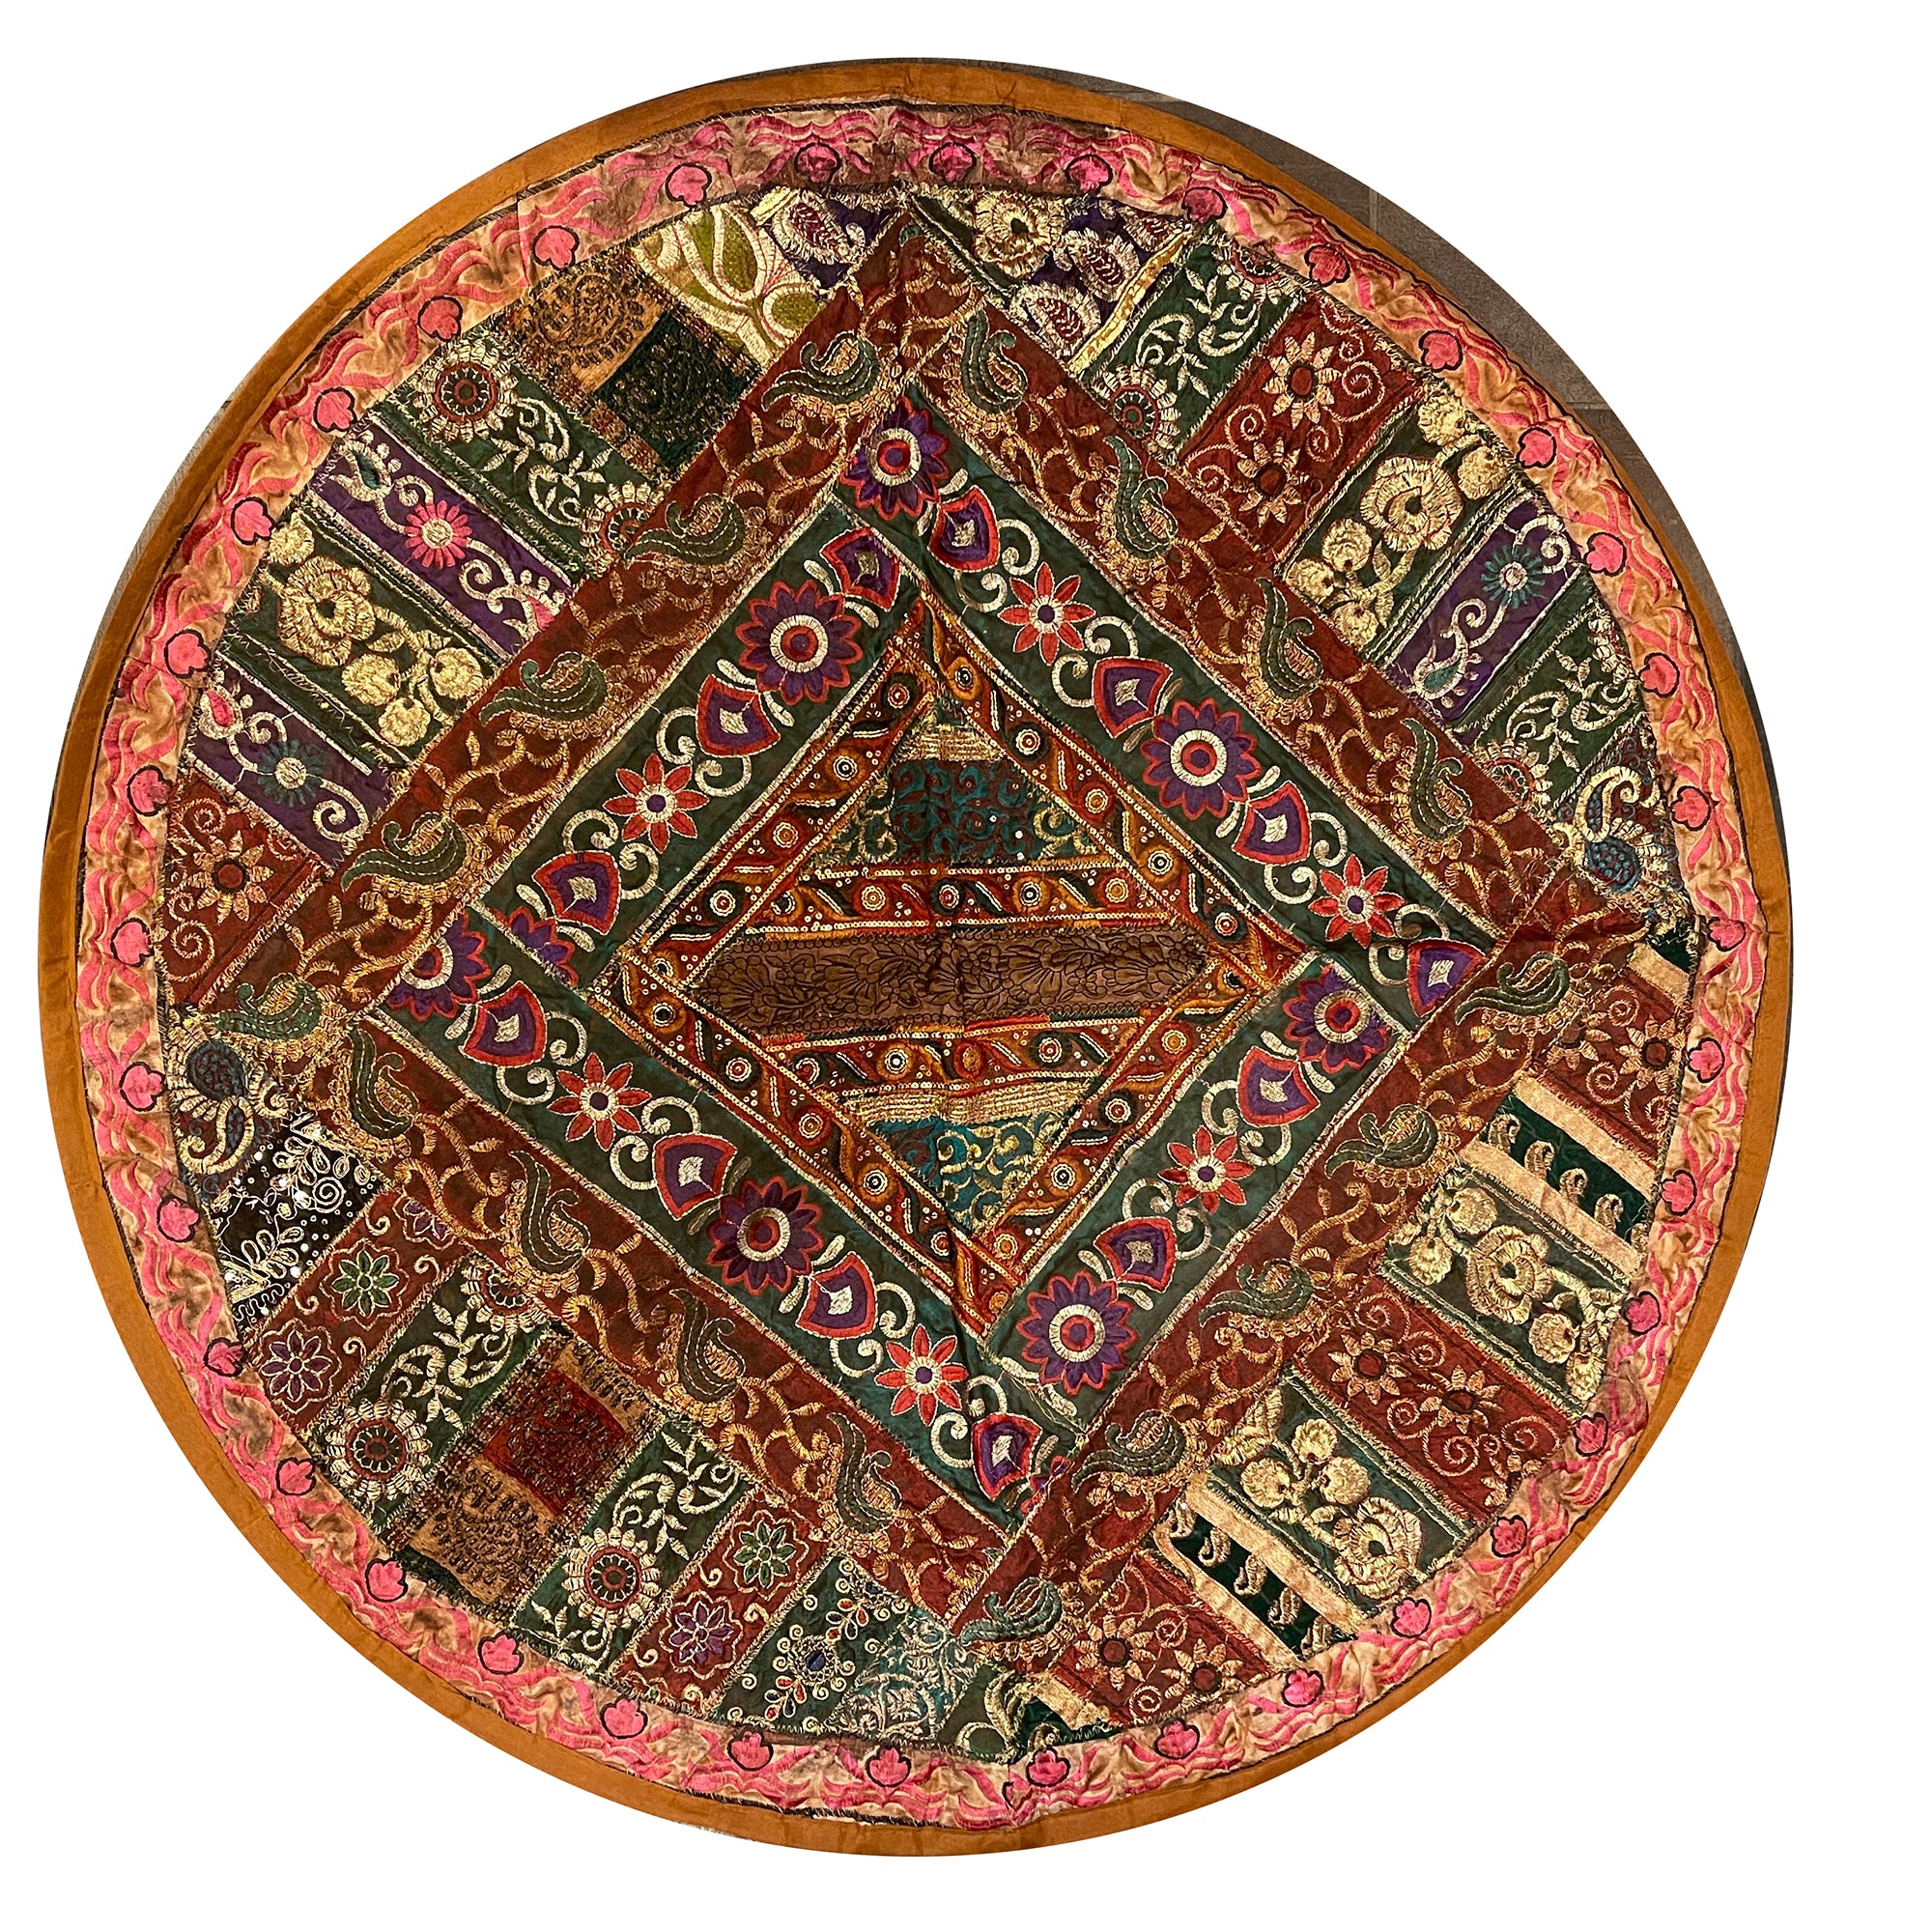 Round Wall Hanging/Table Decor  8994 - Vintage India NYC